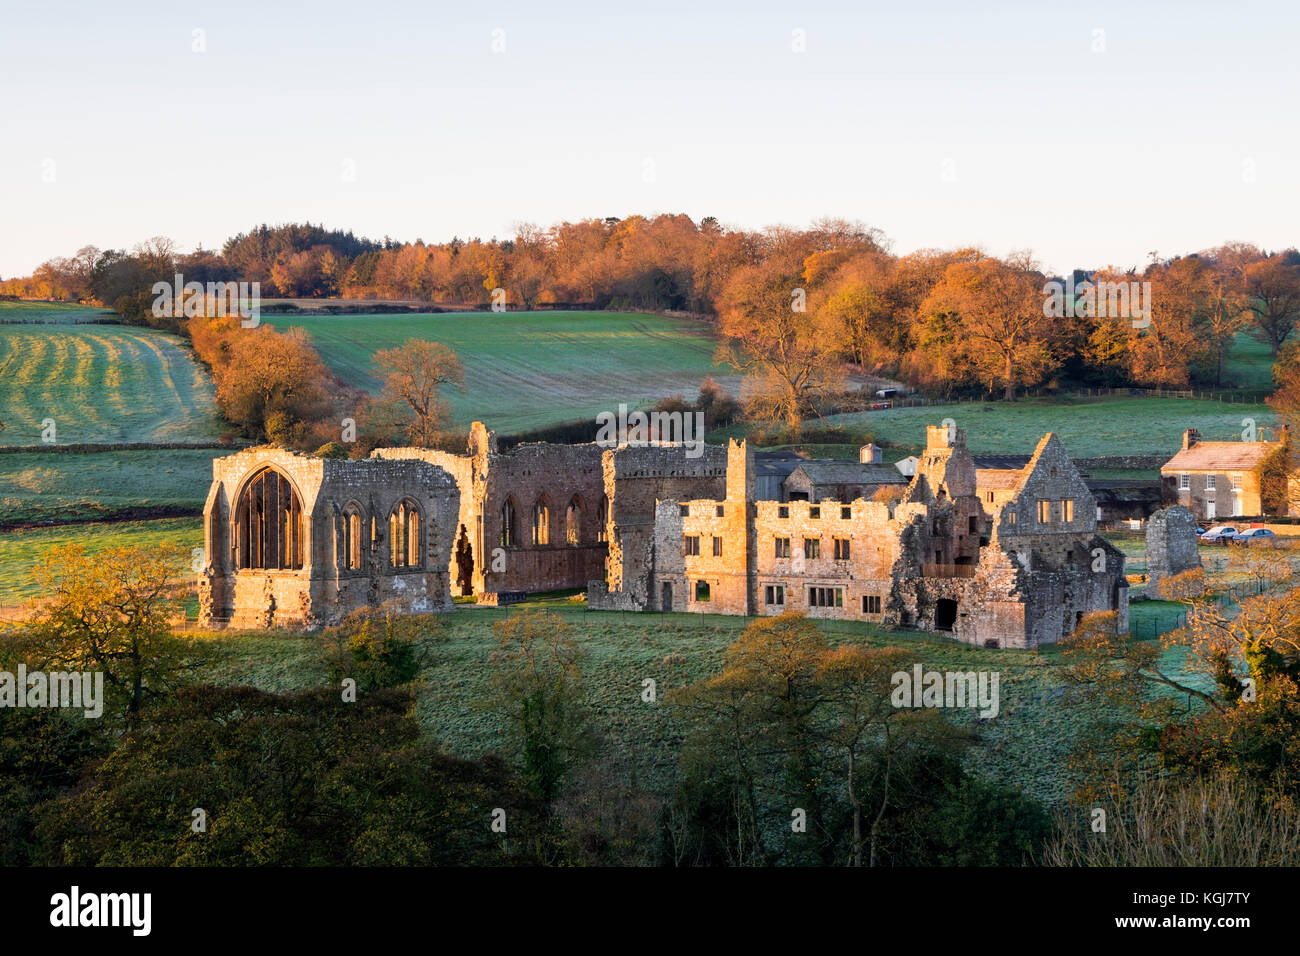 Barnard Castle, Teesdale, County Durham UK. Wednesday 8th November 2017. UK Weather. It was a bright and frosty start to the day as the first rays of the rising sun illuminated the ruins of Egglestone Abbey near Barnard Castle this morning. Credit: David Forster/Alamy Live News Stock Photo